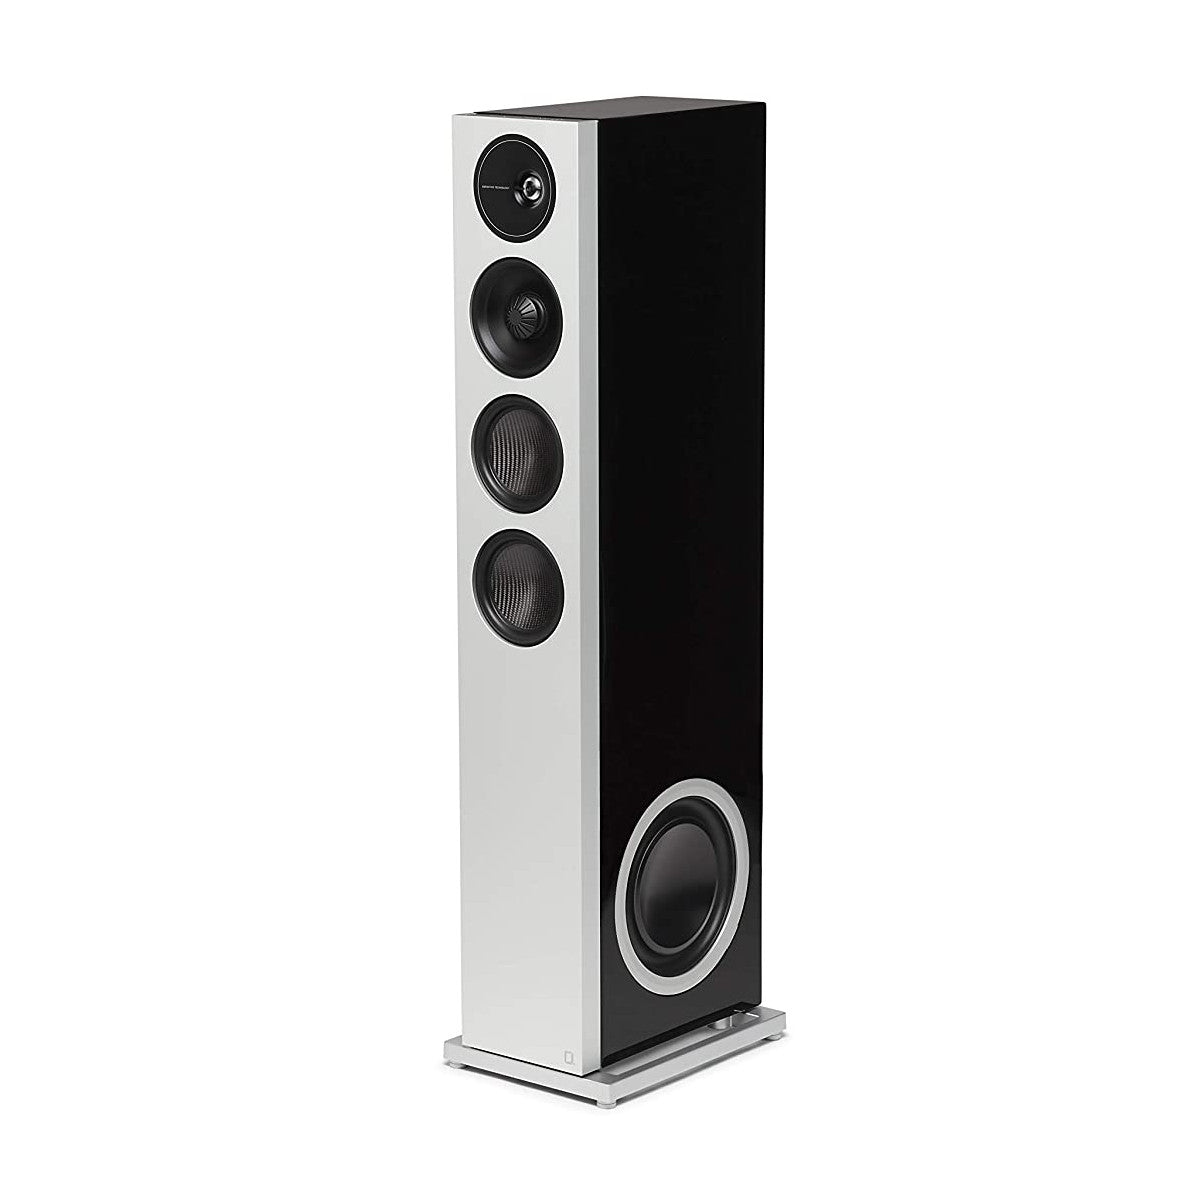 Definitive Technology D17 High-Performance Tower Speaker - Ooberpad India